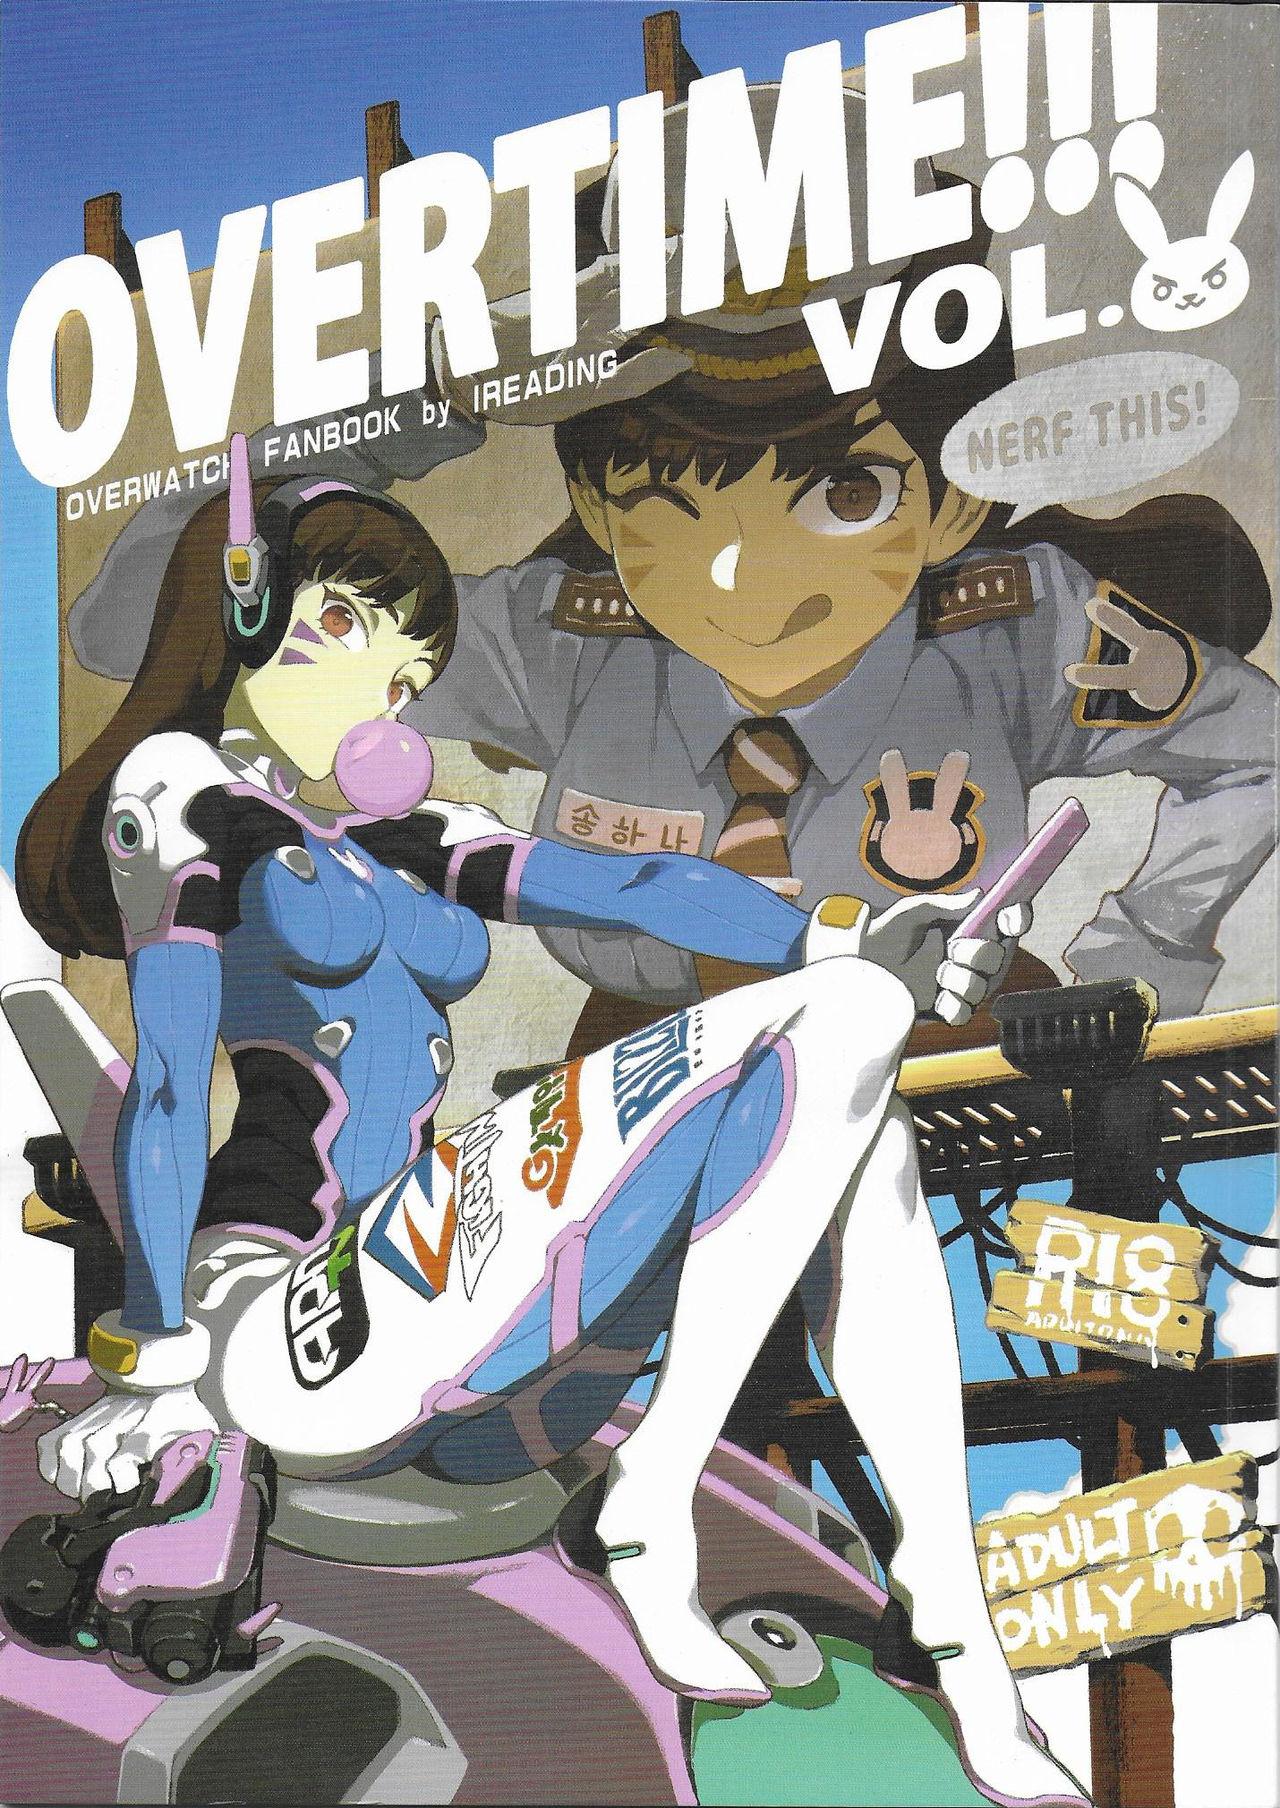 Bubblebutt OVERTIME!! OVERWATCH FANBOOK VOL. 2 - Overwatch Play - Picture 1